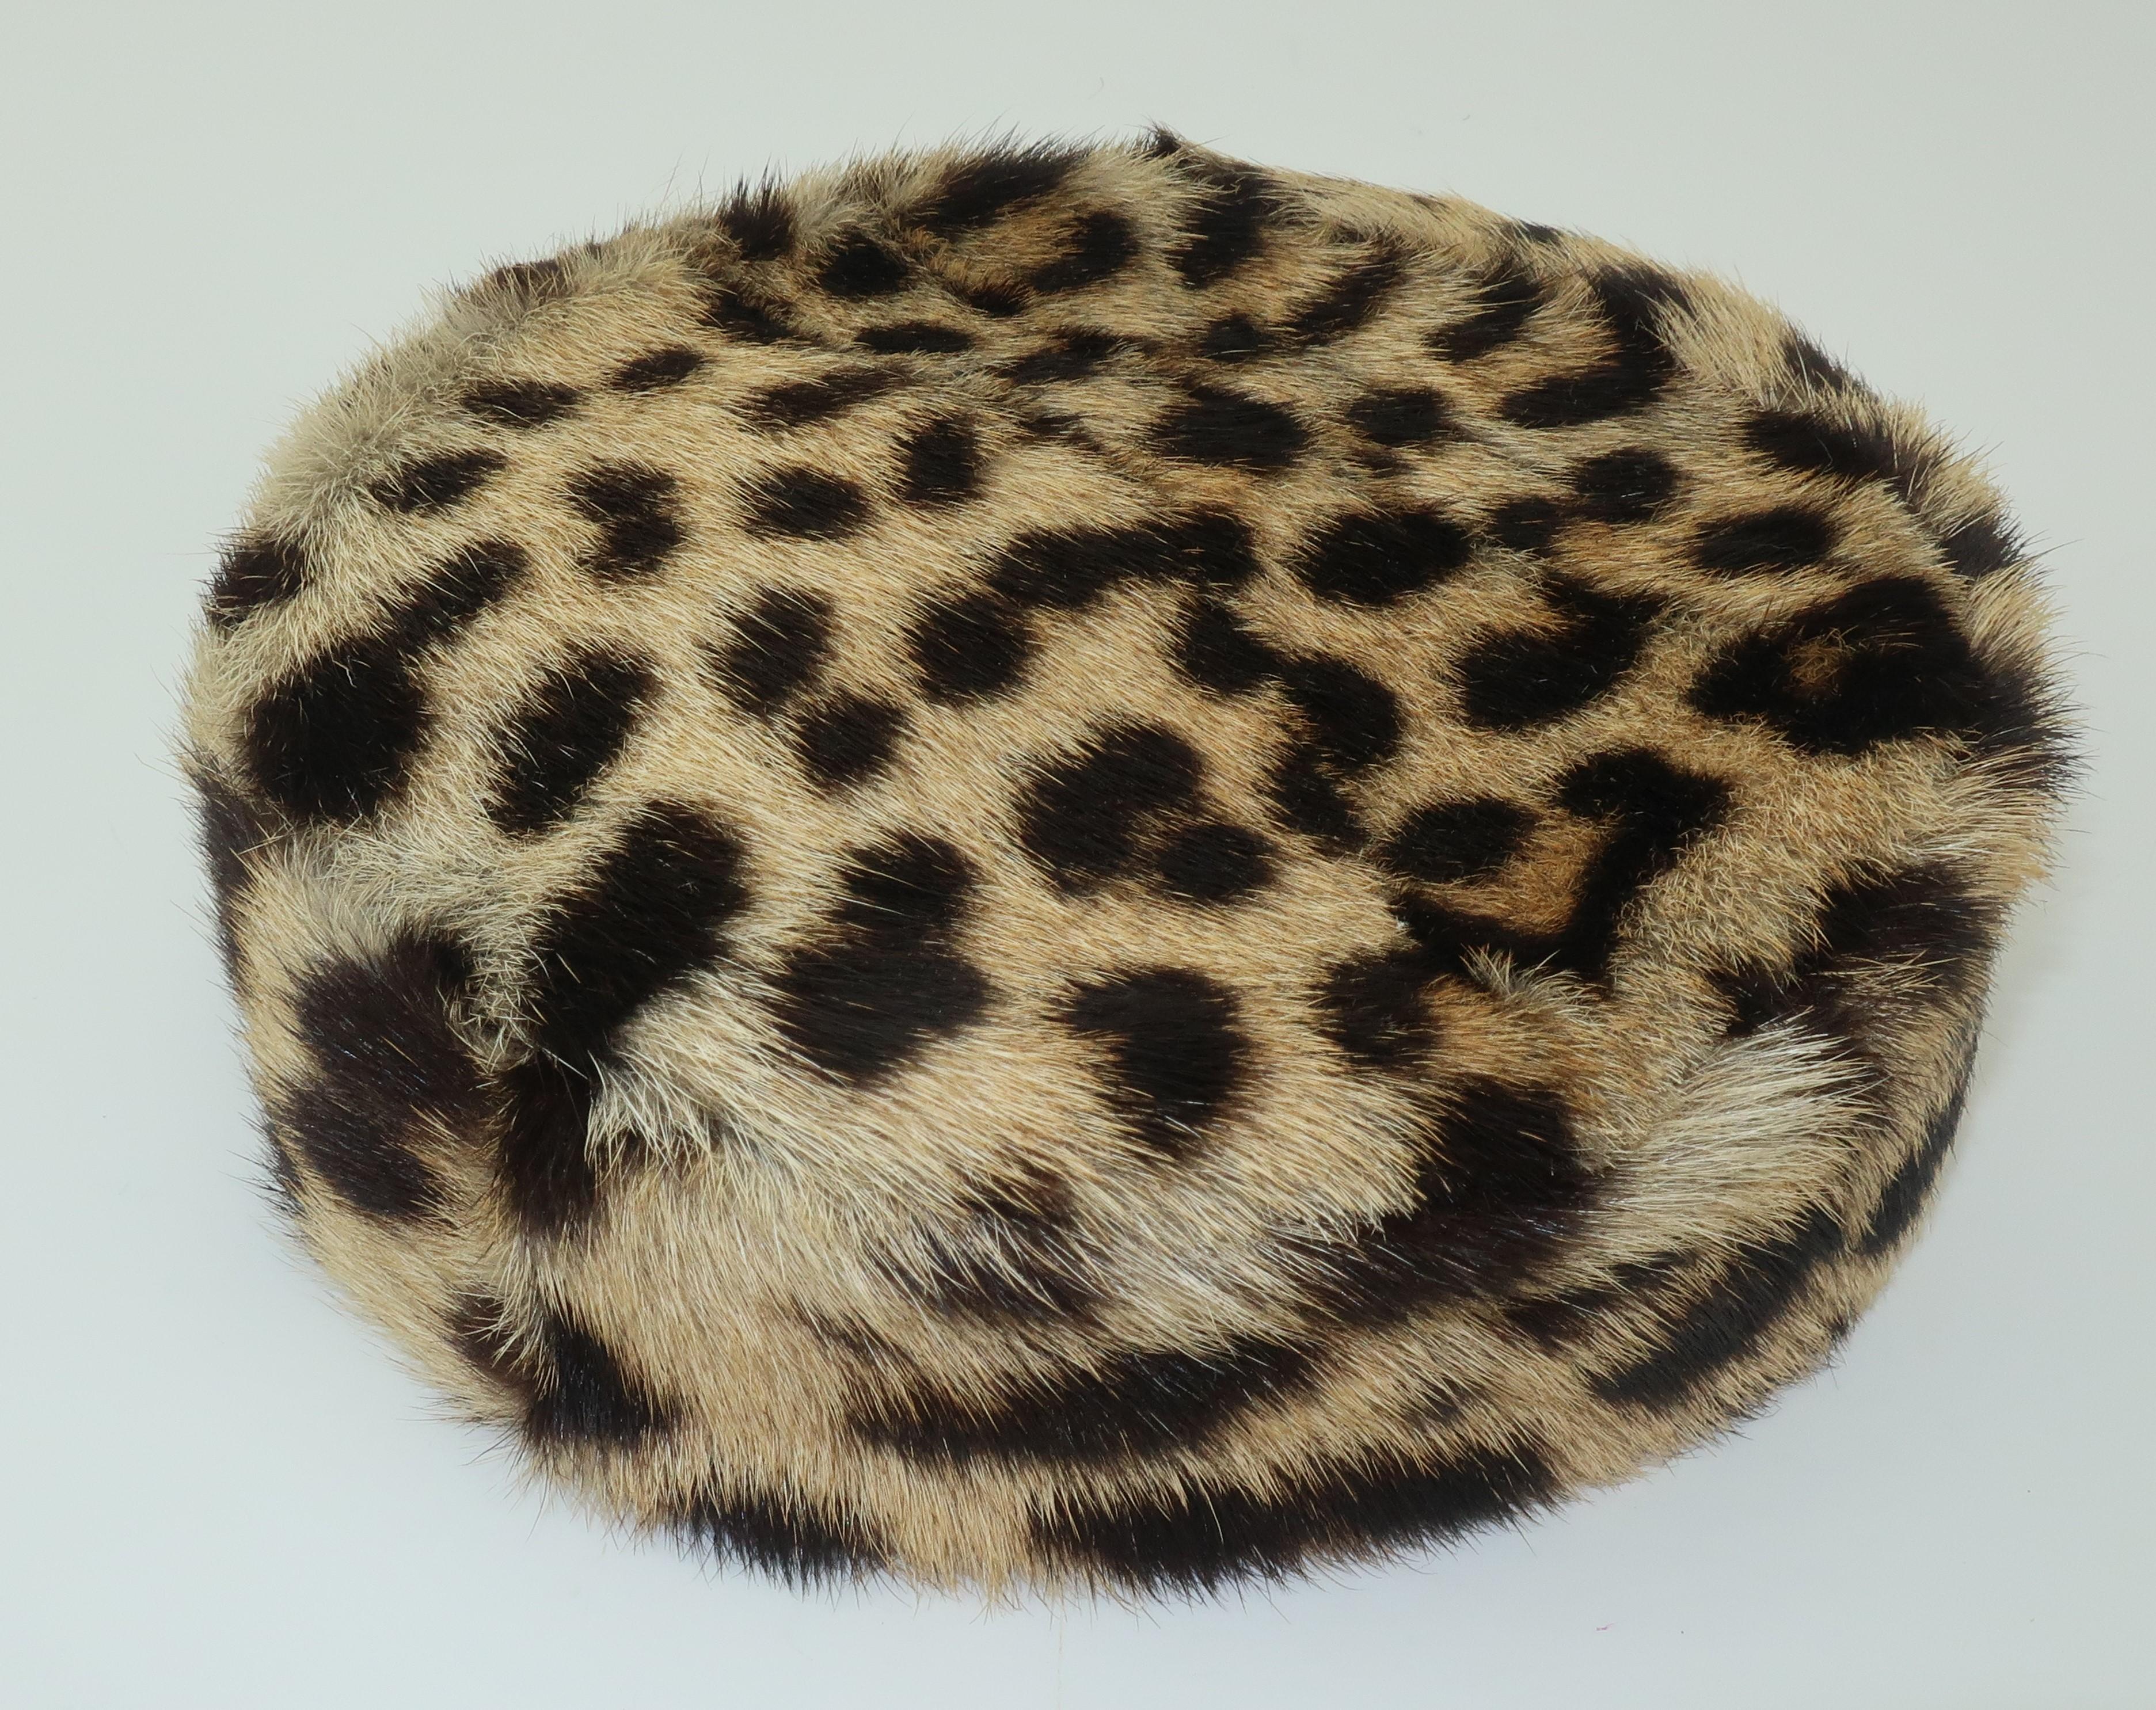 Women's 1960's Leopard Print Fur Pillbox Hat From Lord & Taylor NY